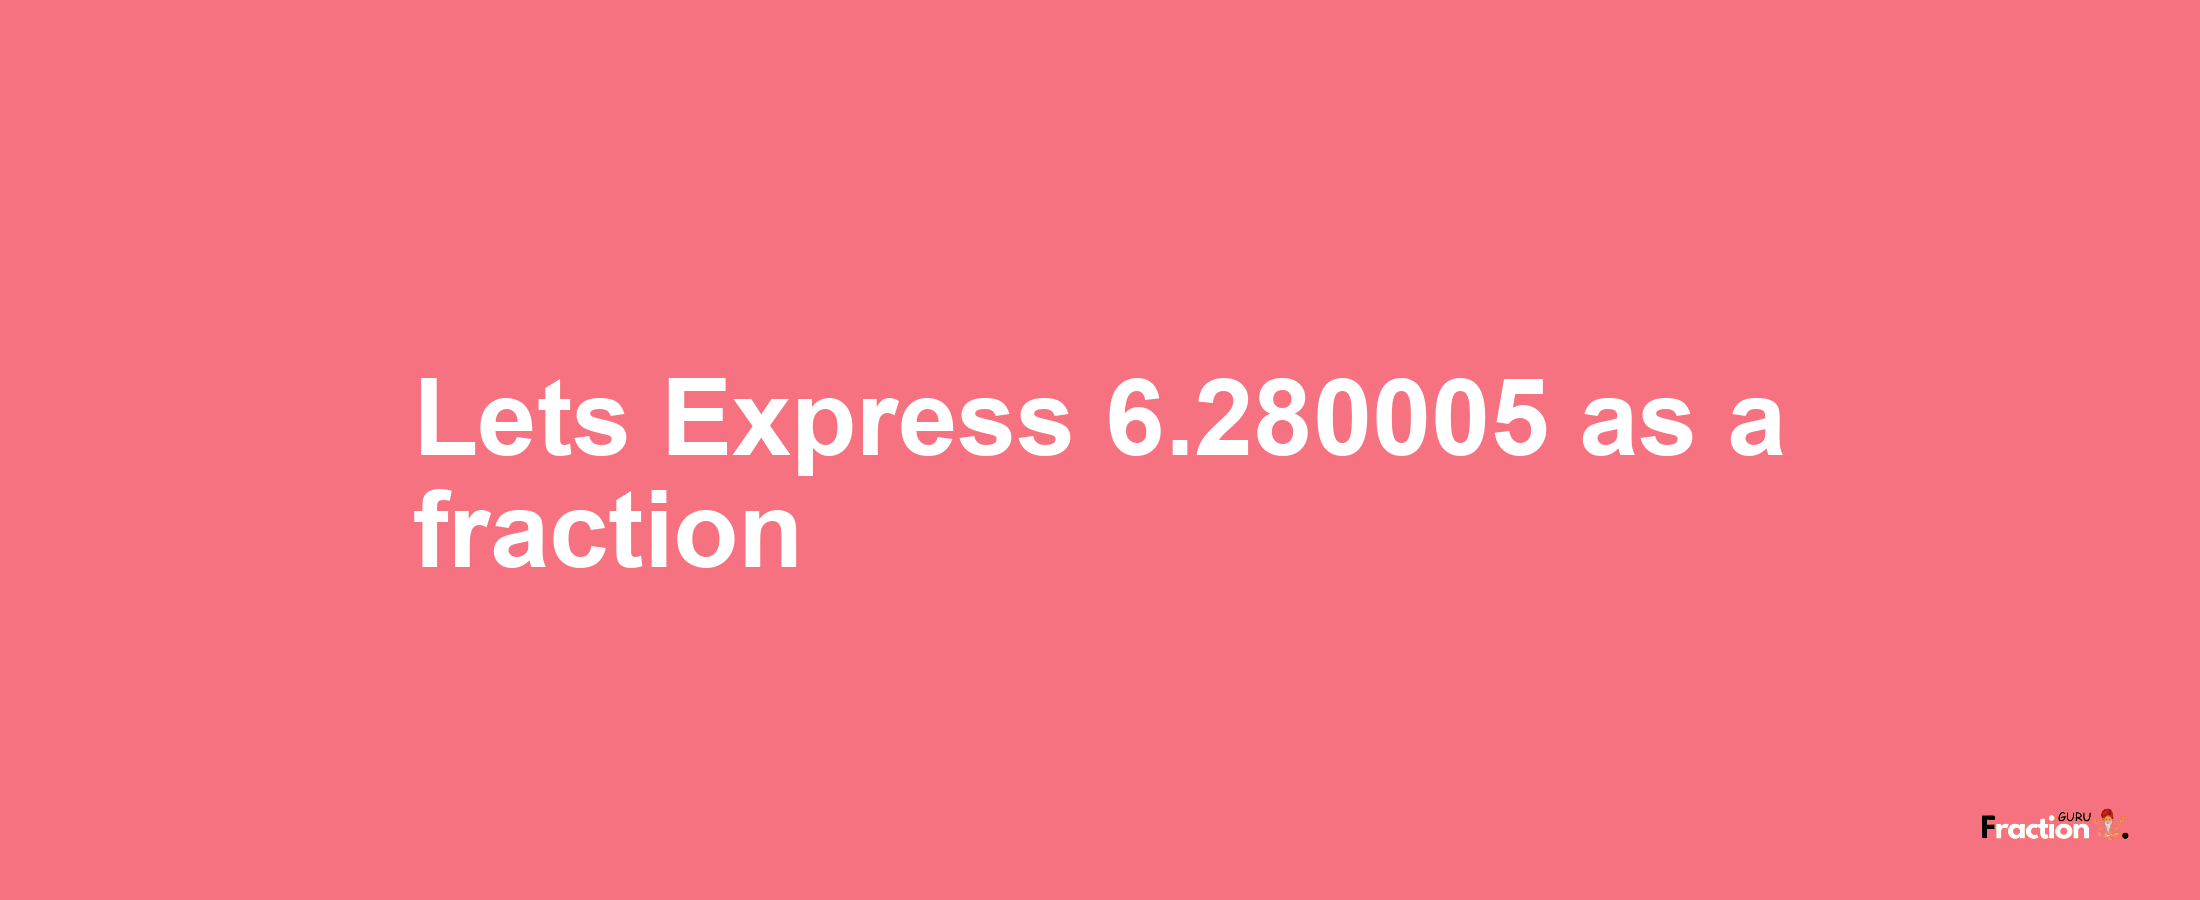 Lets Express 6.280005 as afraction